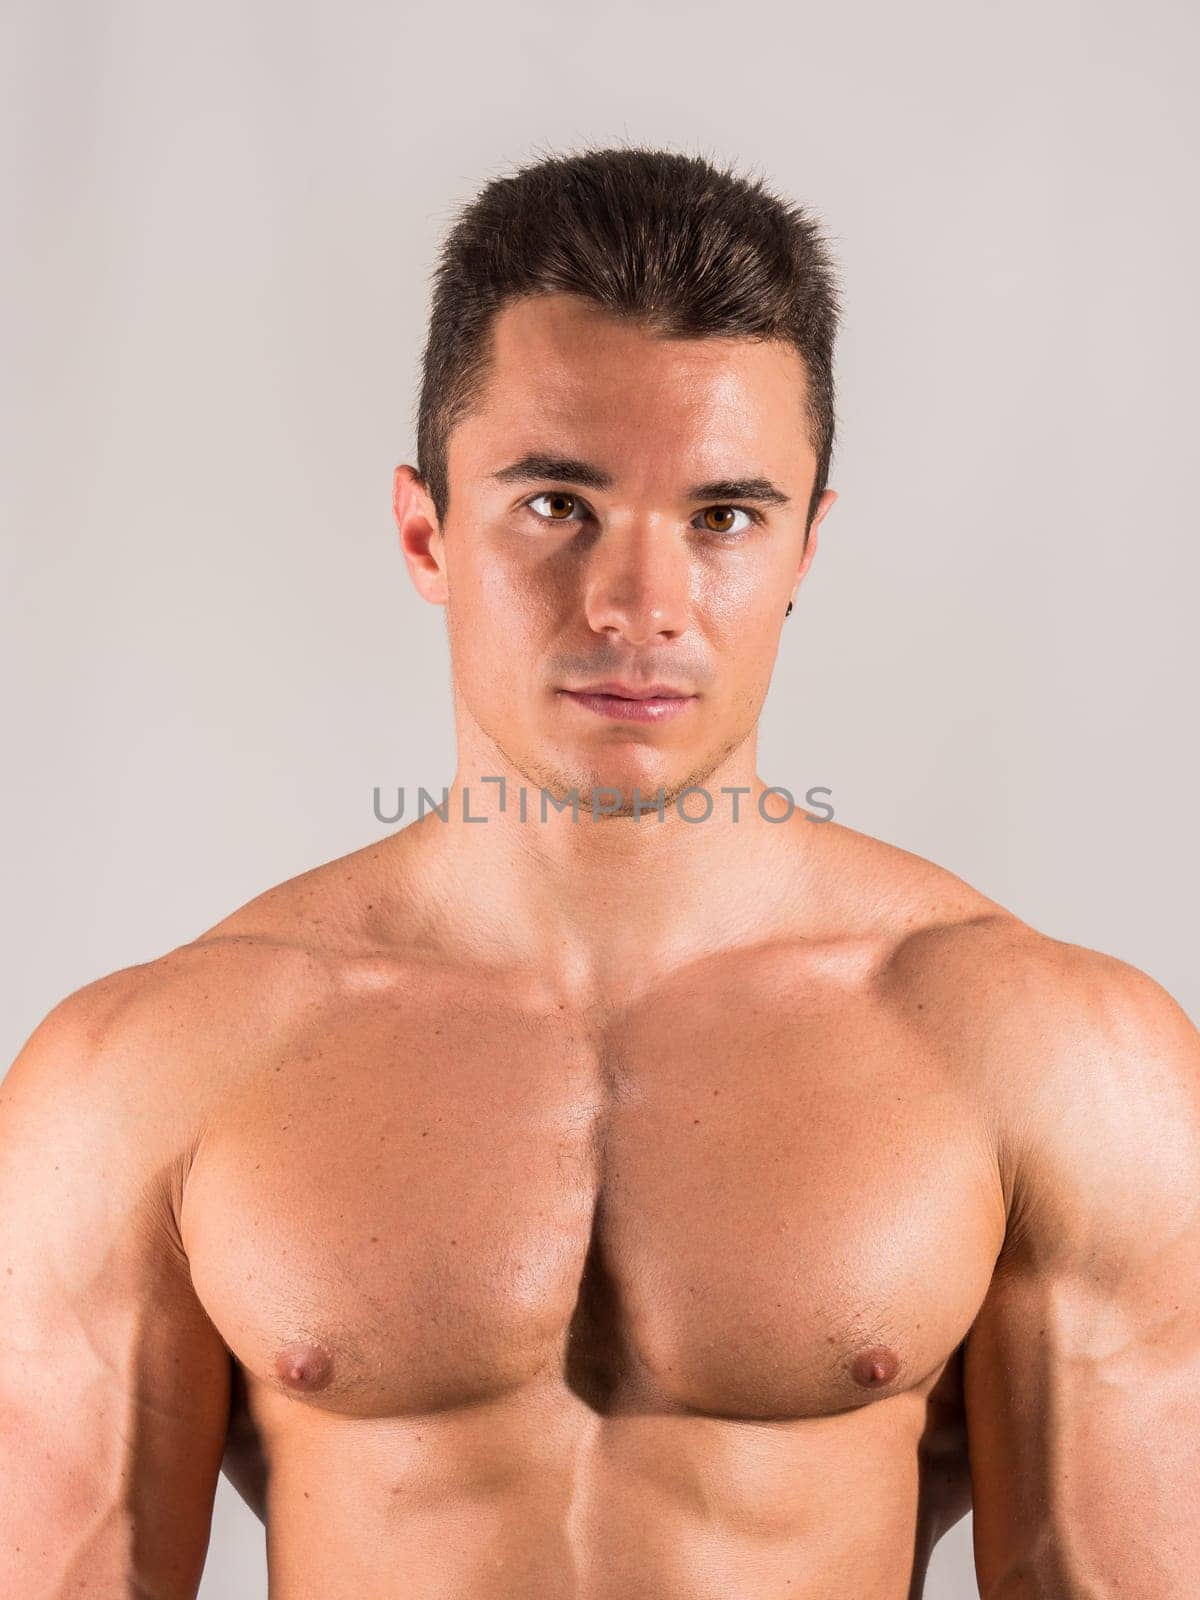 Shirtless young male bodybuilder in studio portrait, looking at camera on neutral background, showing muscular torso and body